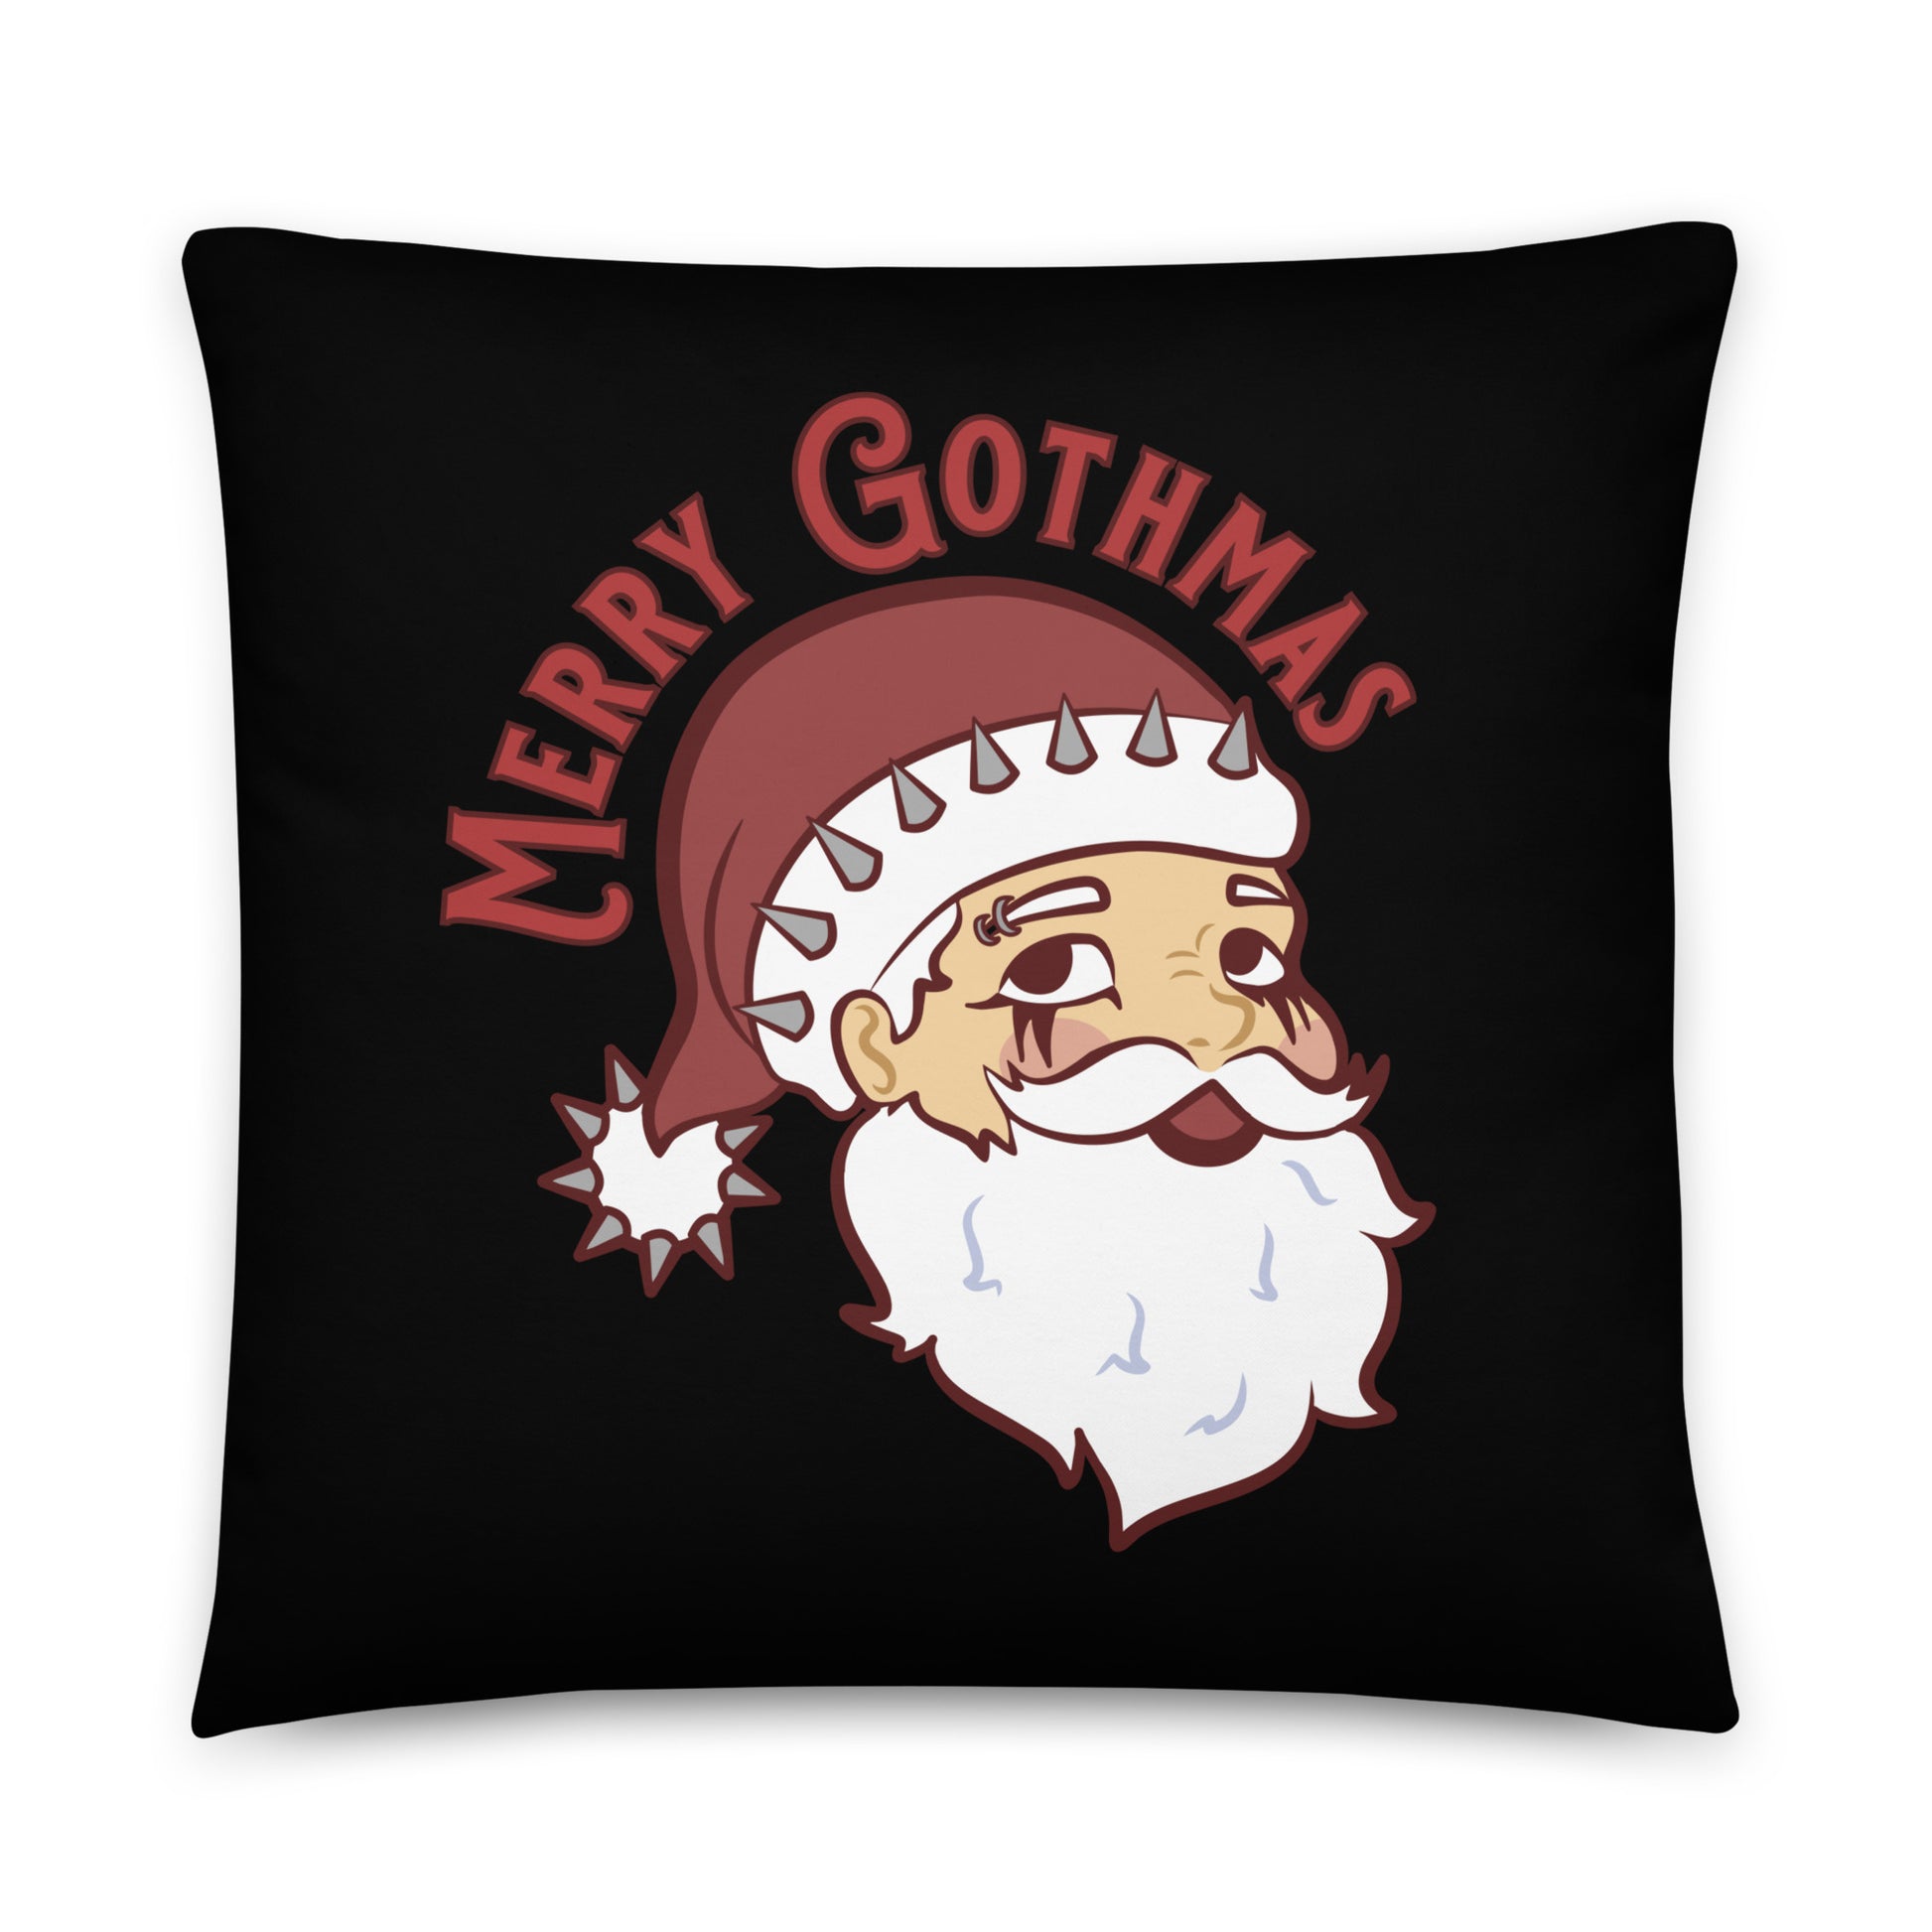 A black 22" x 22" throw pillow featuring an image of Santa Claus. Santa is wearing goth-style makeup and his hat is decorated with spikes. Text above Santa's head reads "Merry Gothmas"